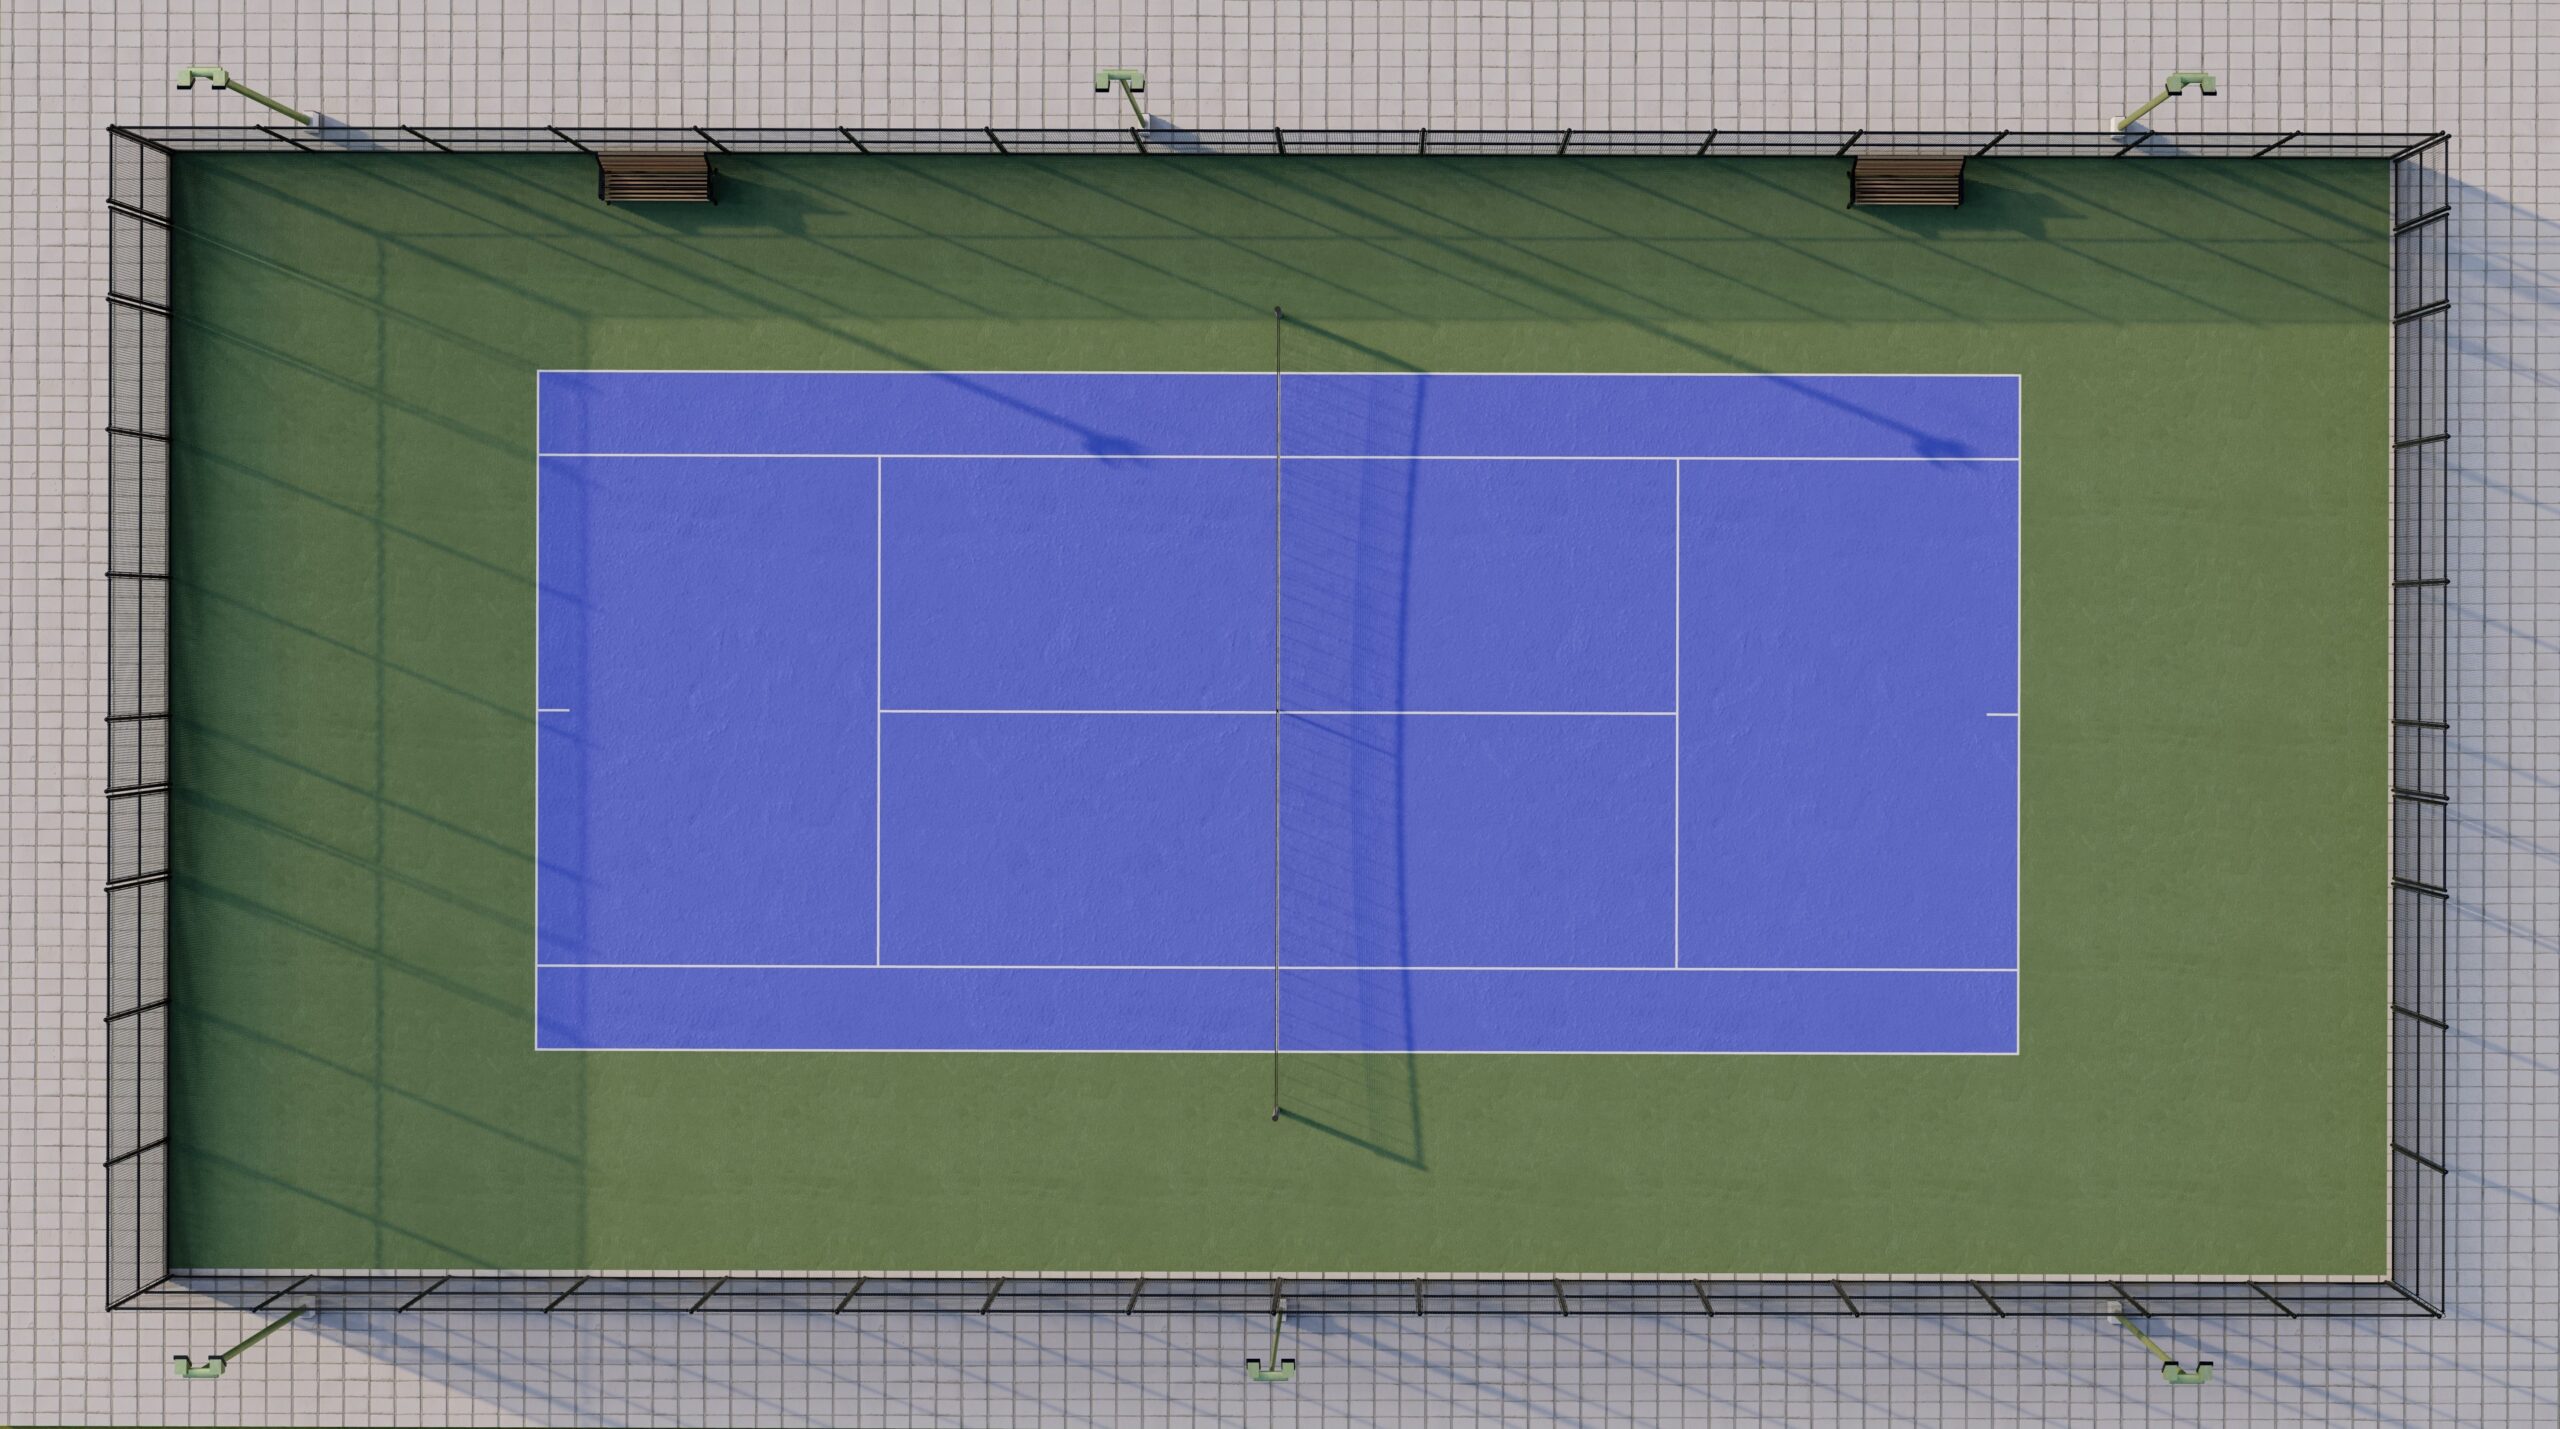 one tennis court as the base for a conversion